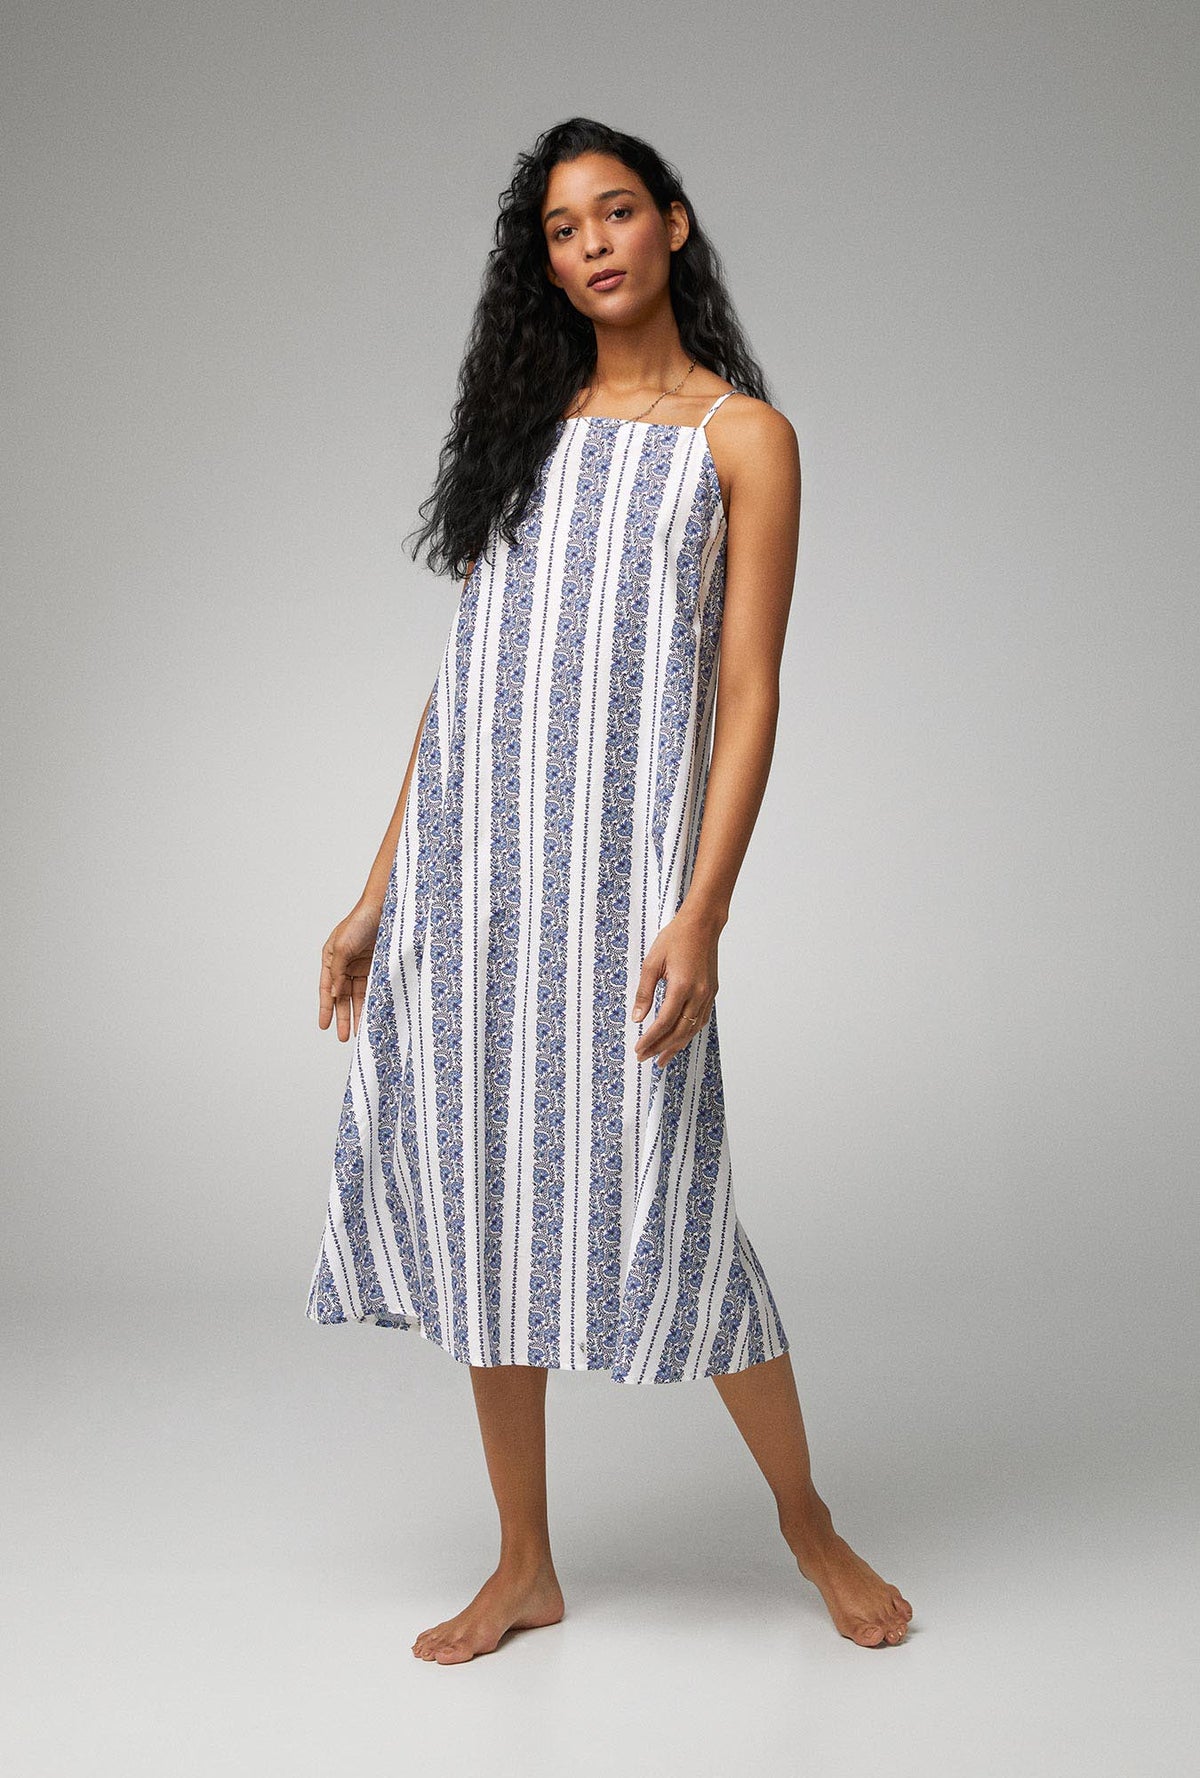 A lady wearing Square Neck Woven Cotton Silk Maxi Dress with Provencal Stripe print